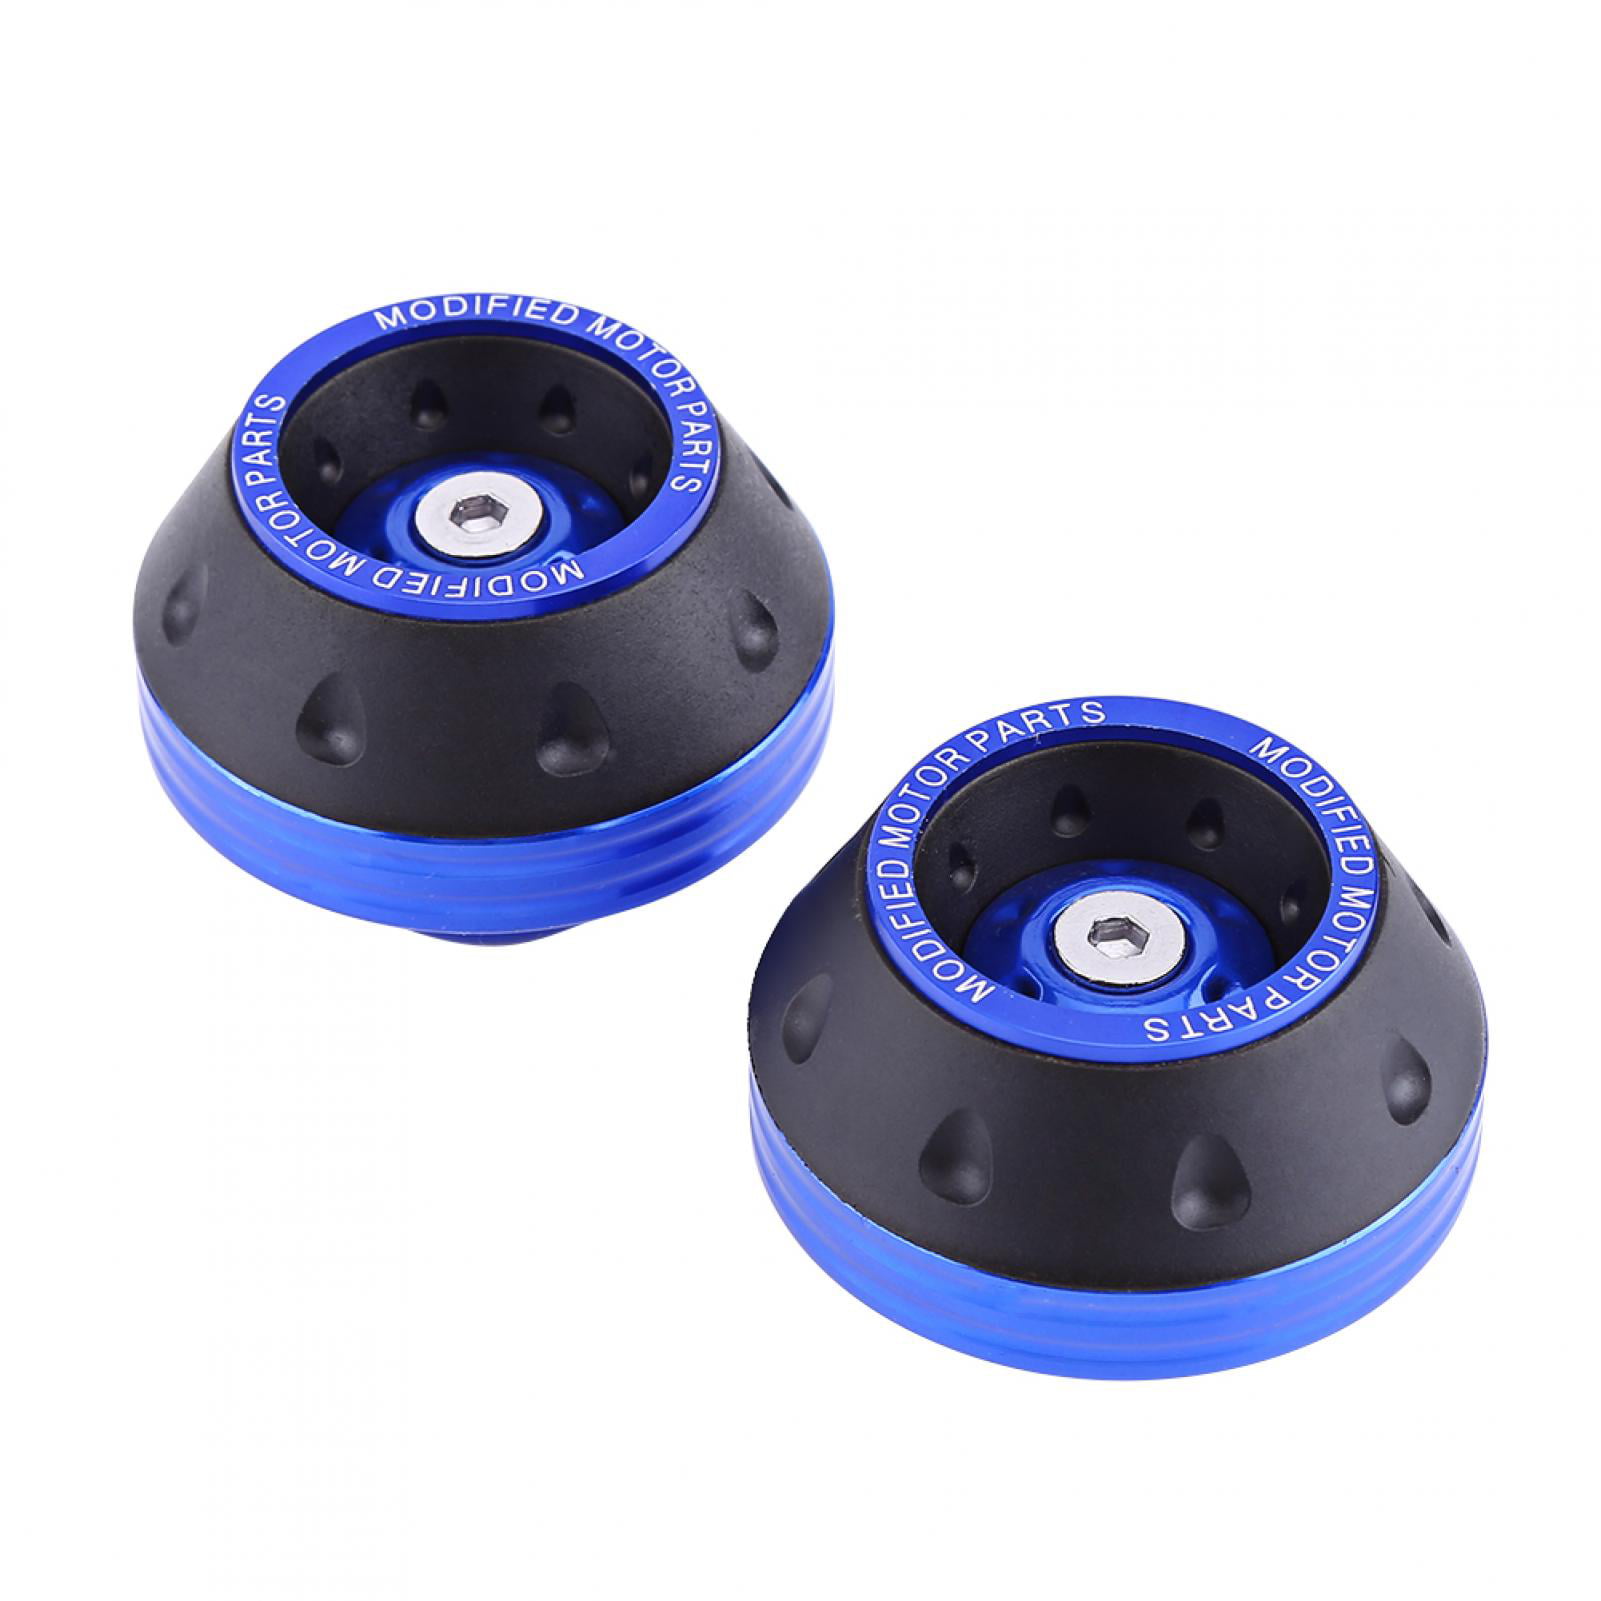 Blue Qiilu CNC Aluminum Front Fork Wheel Frame Sliders Motorbike Falling Protection Scooter Moped 